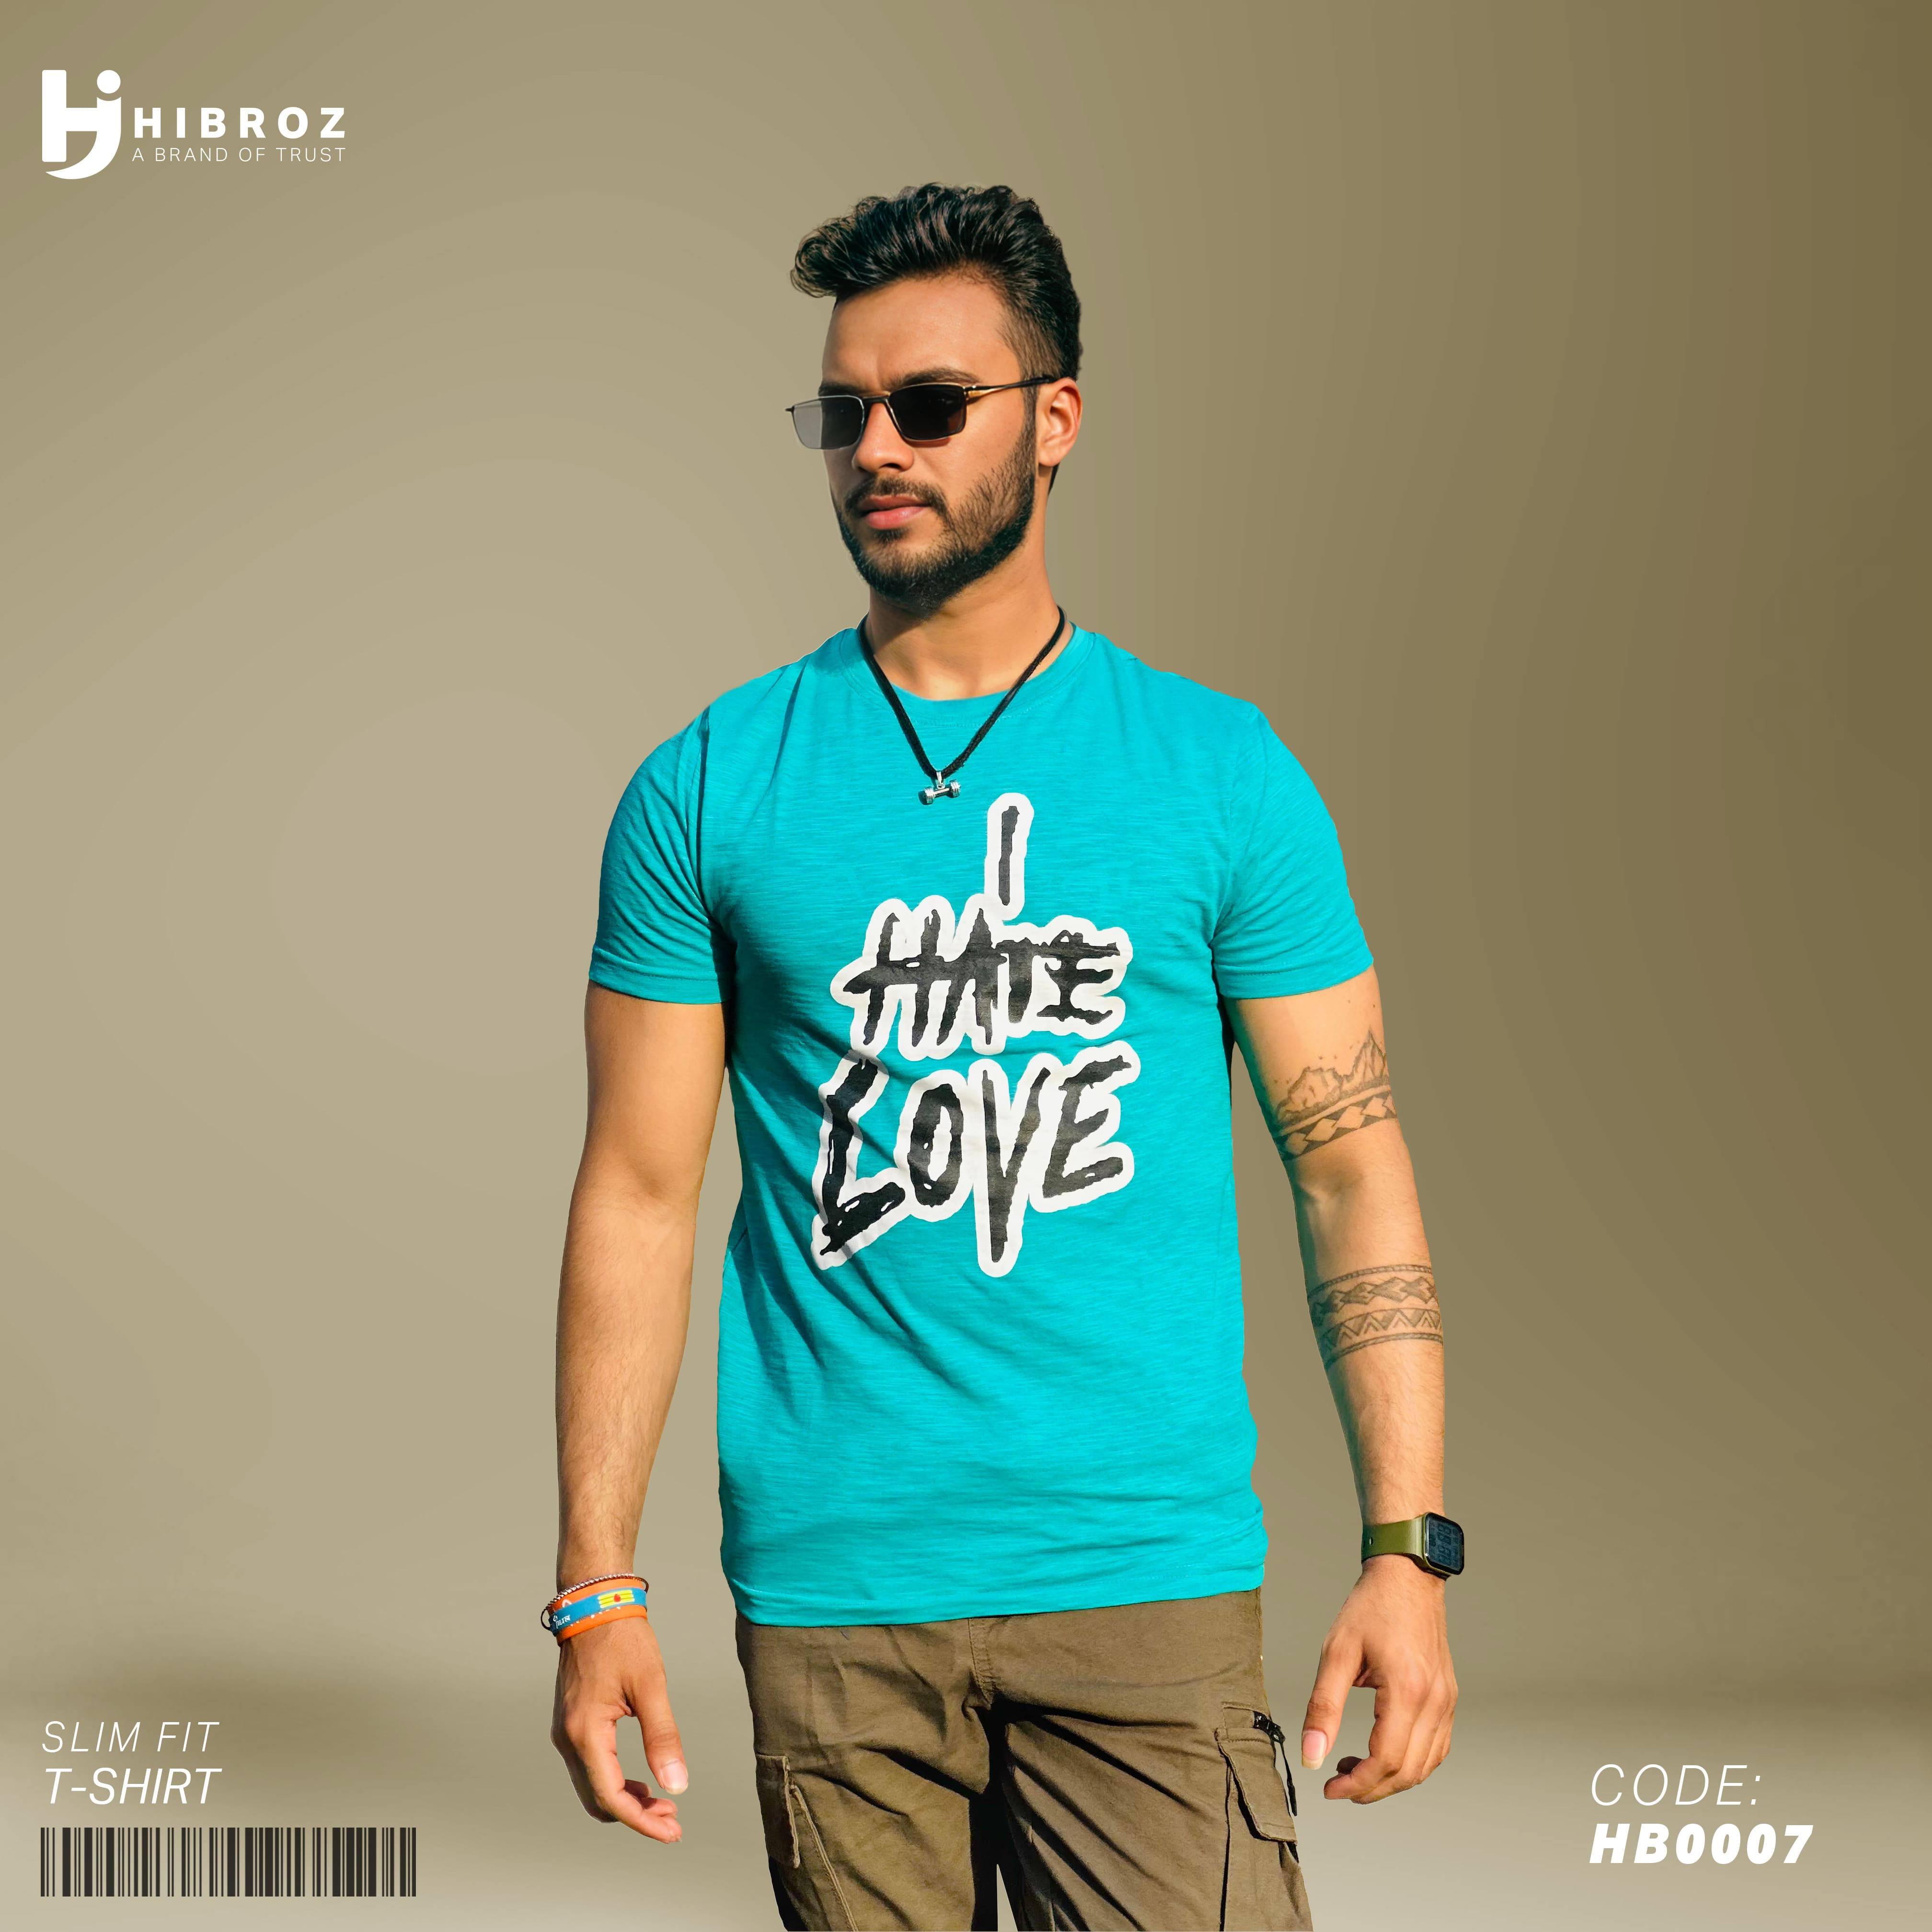 Slim-Fit Men's T-Shirt with Striking Chest Print